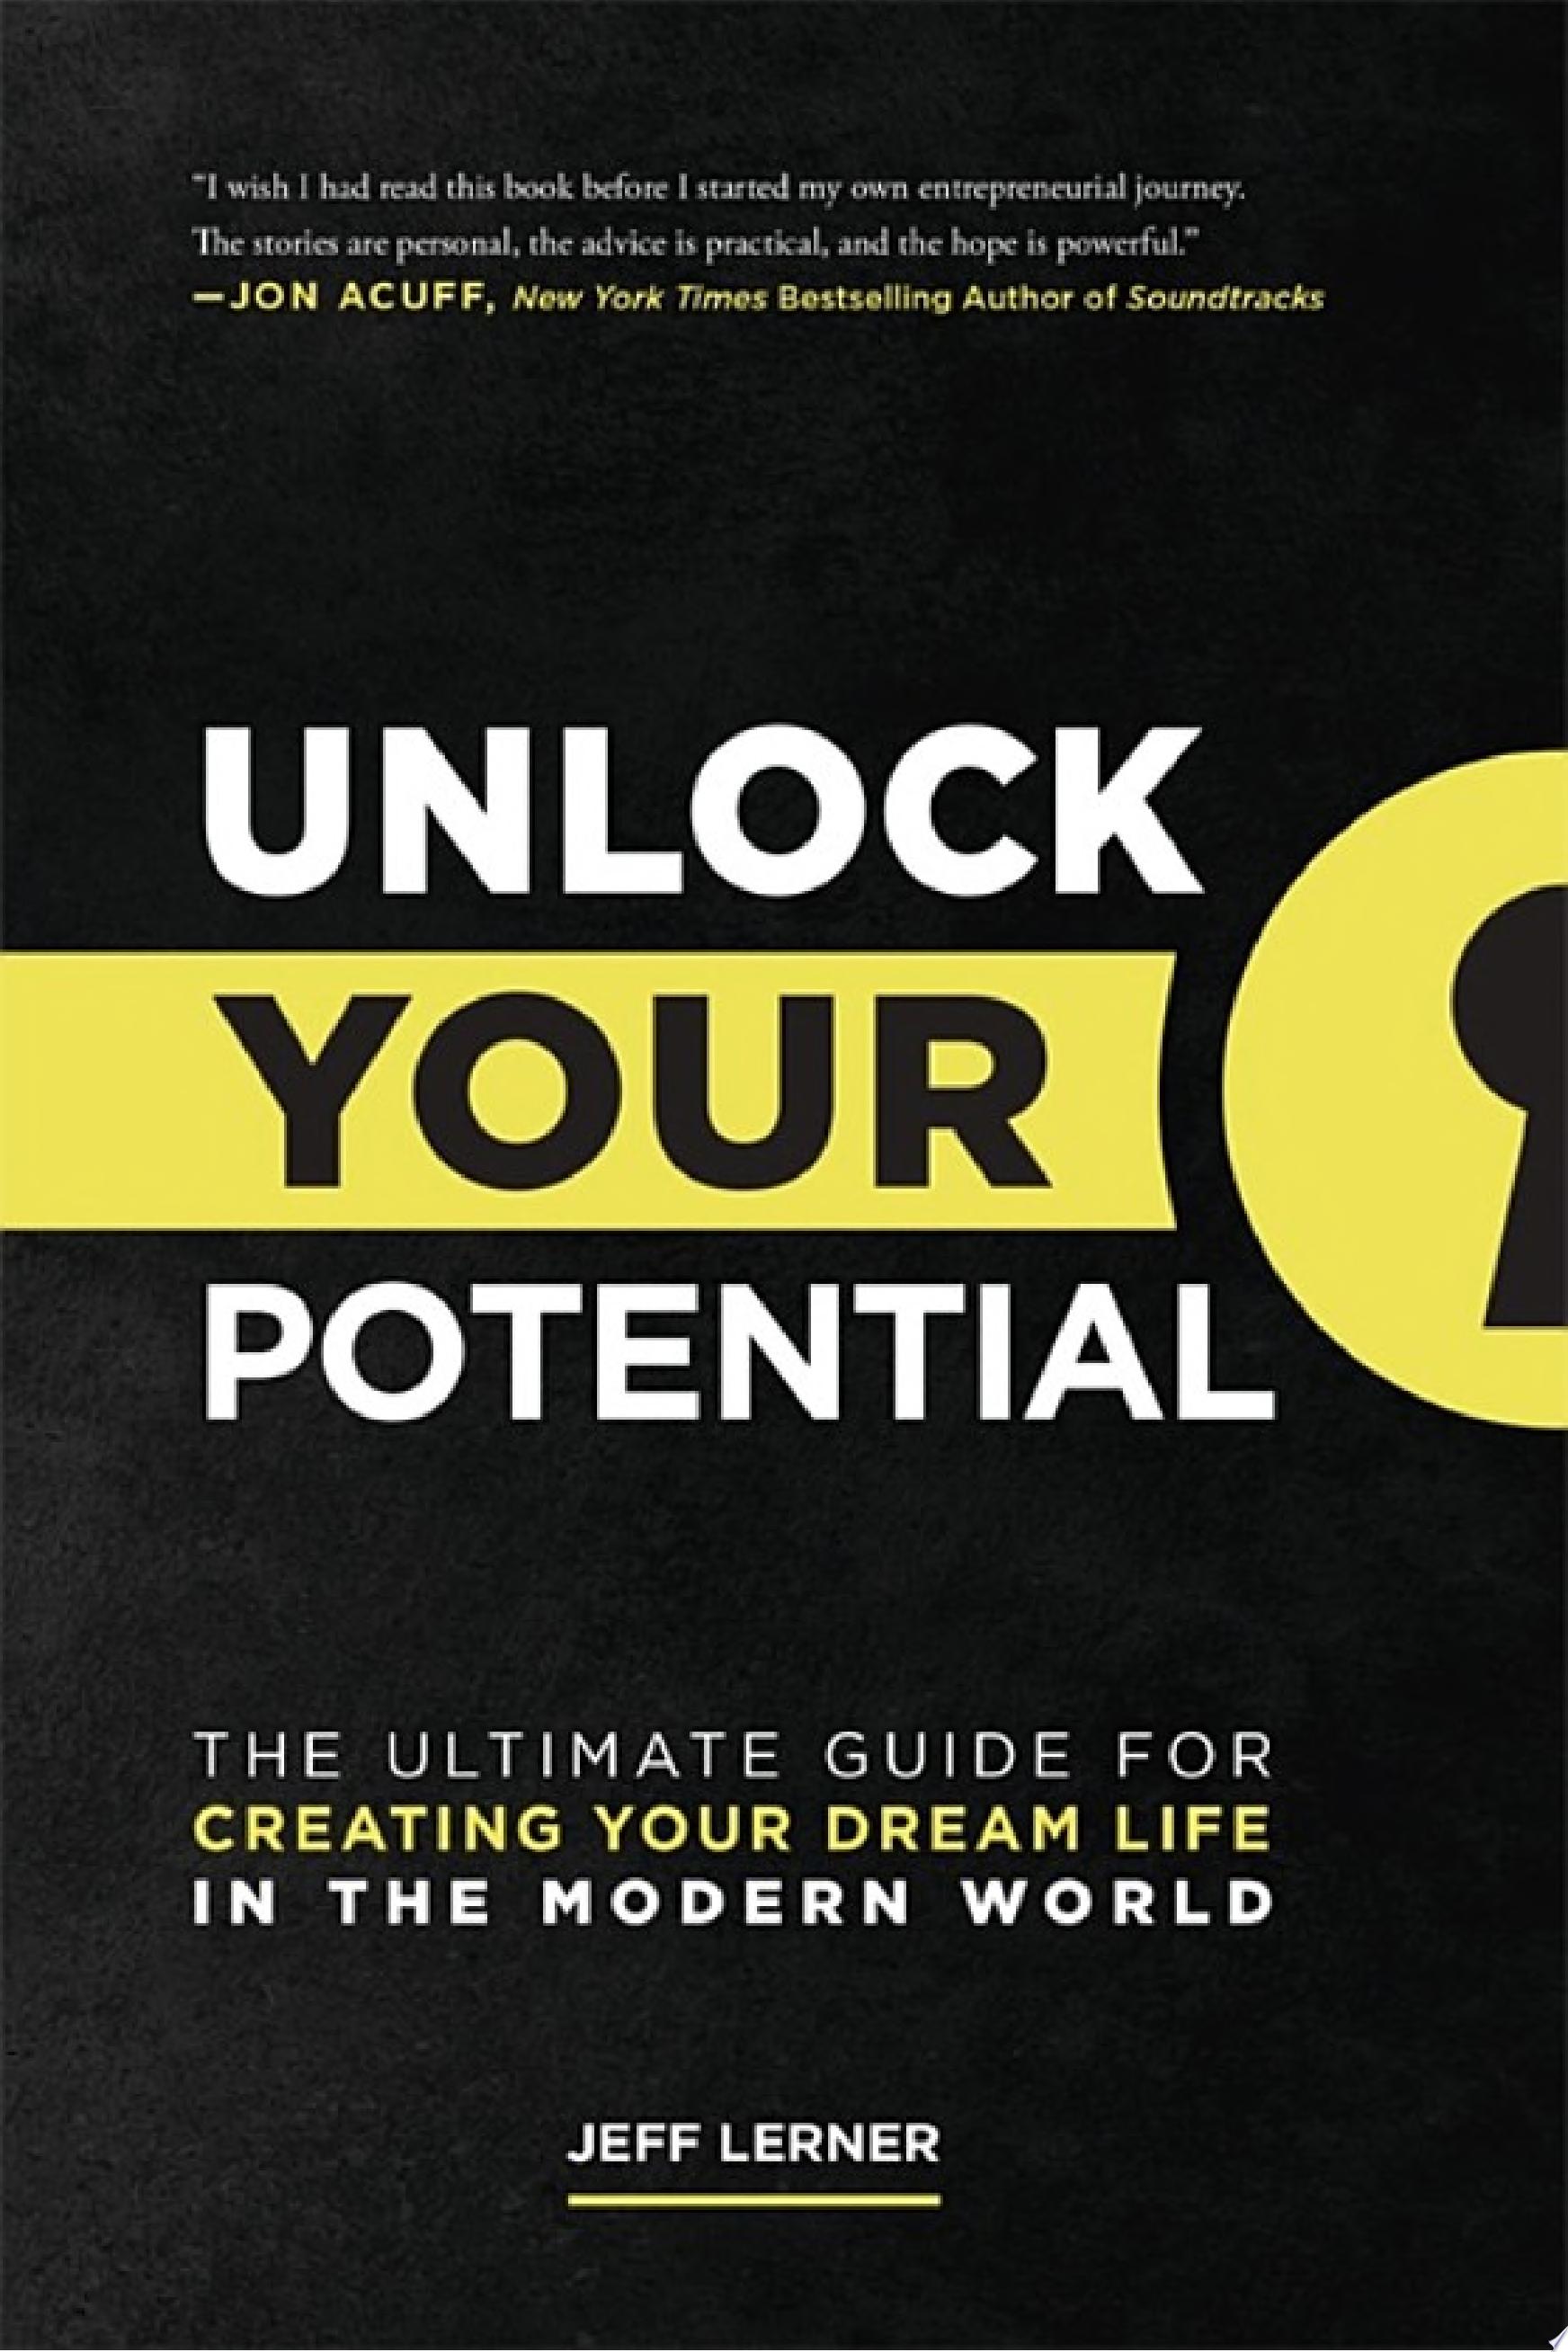 Image for "Unlock Your Potential"